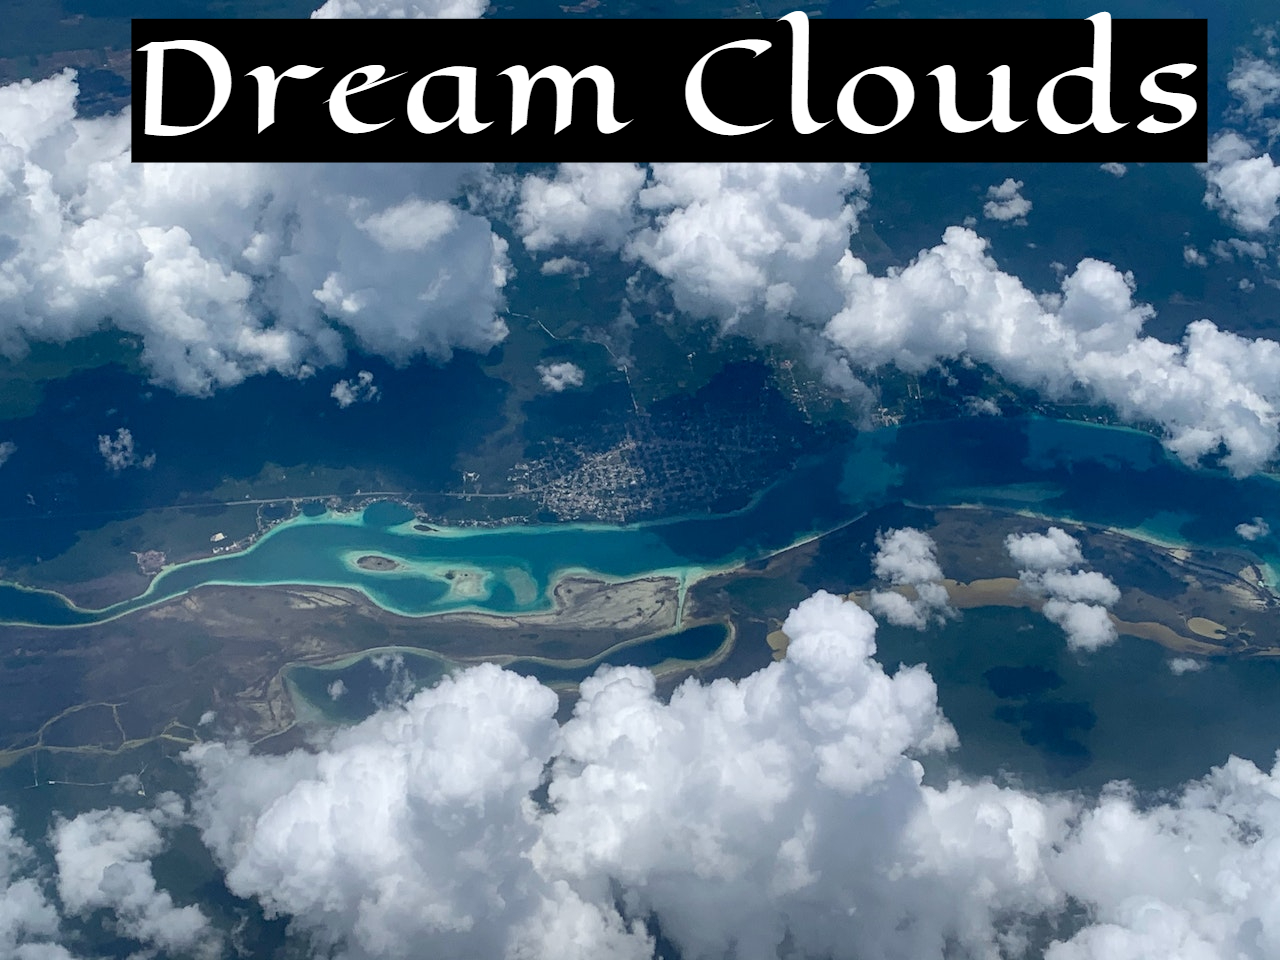 Dream Clouds Meaning - Virtues, Miracles, And Favors